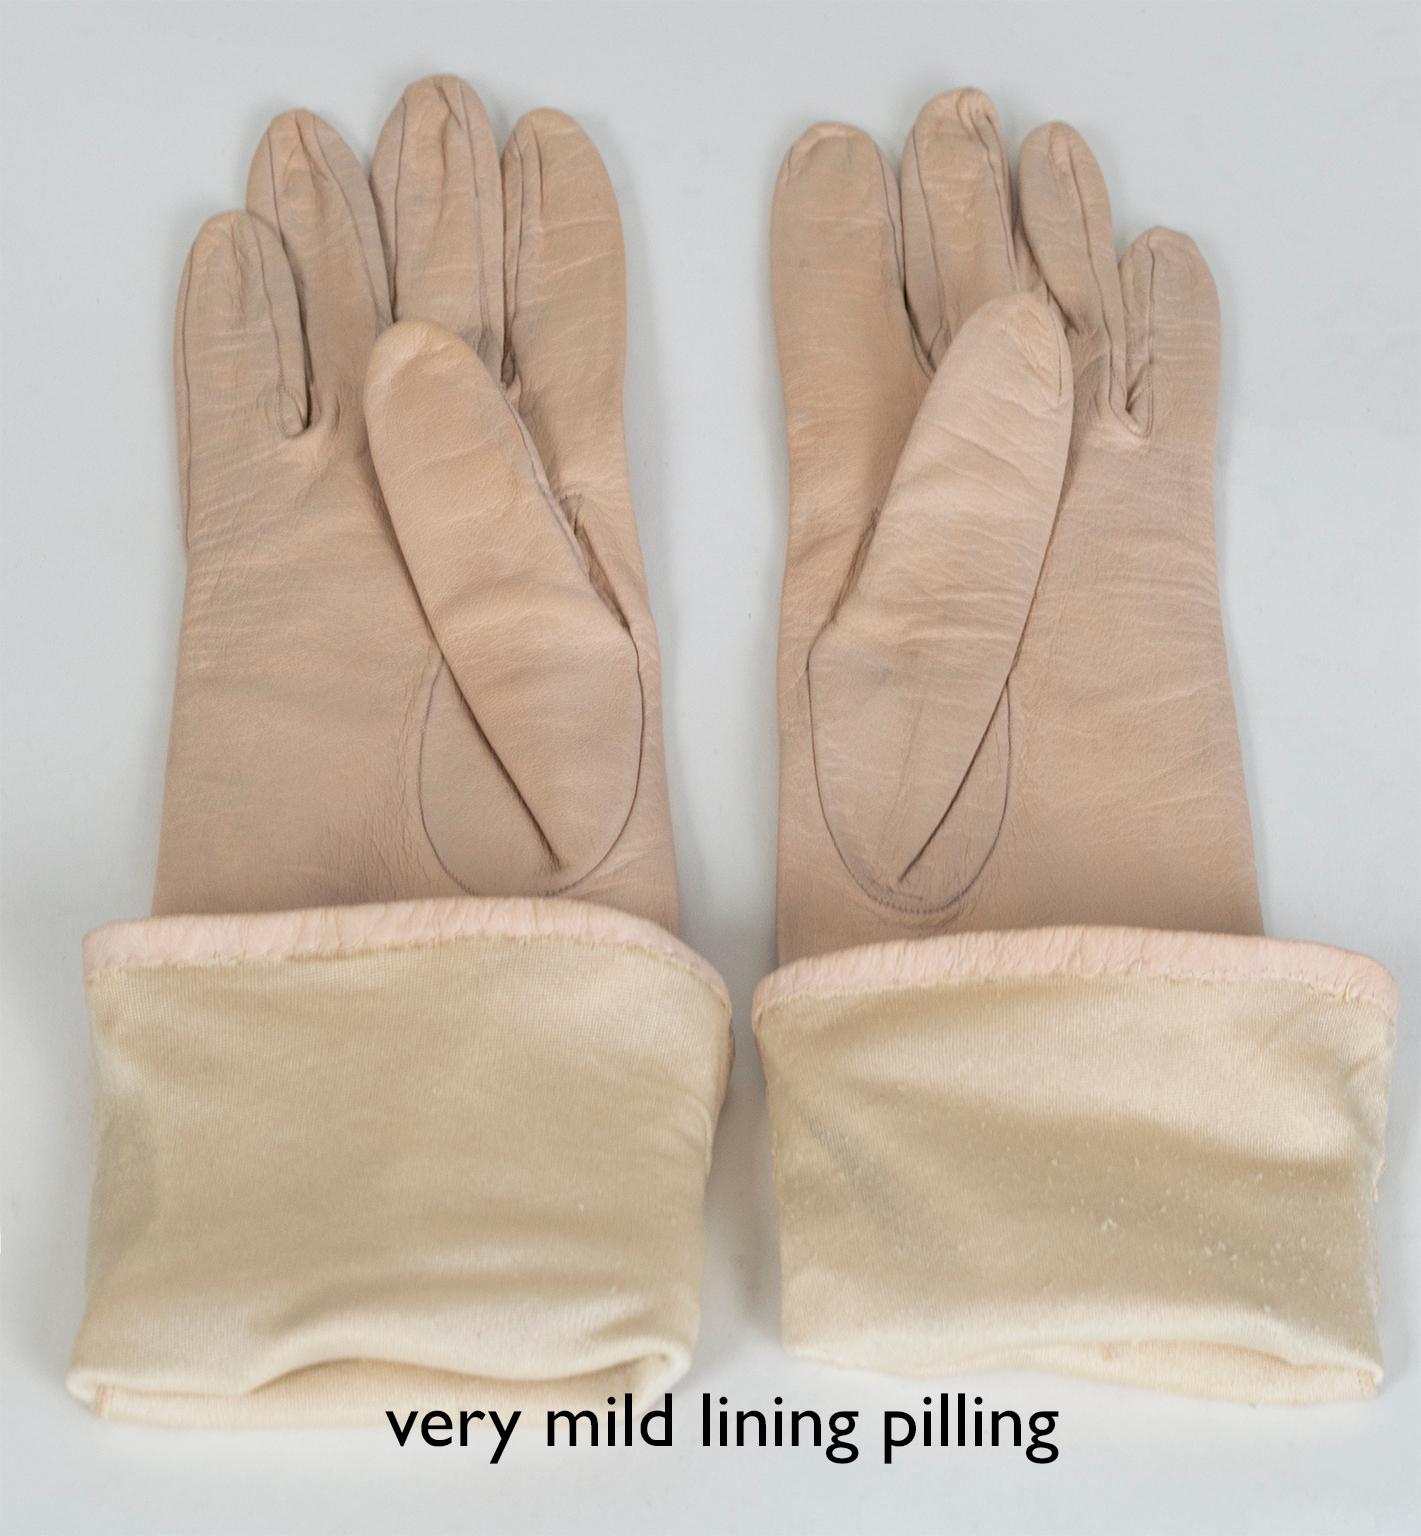 Pale Pink Silk-Lined Kidskin Leather Forearm Gauntlet Evening Gloves-XS-S, 1950s In Good Condition For Sale In Tucson, AZ